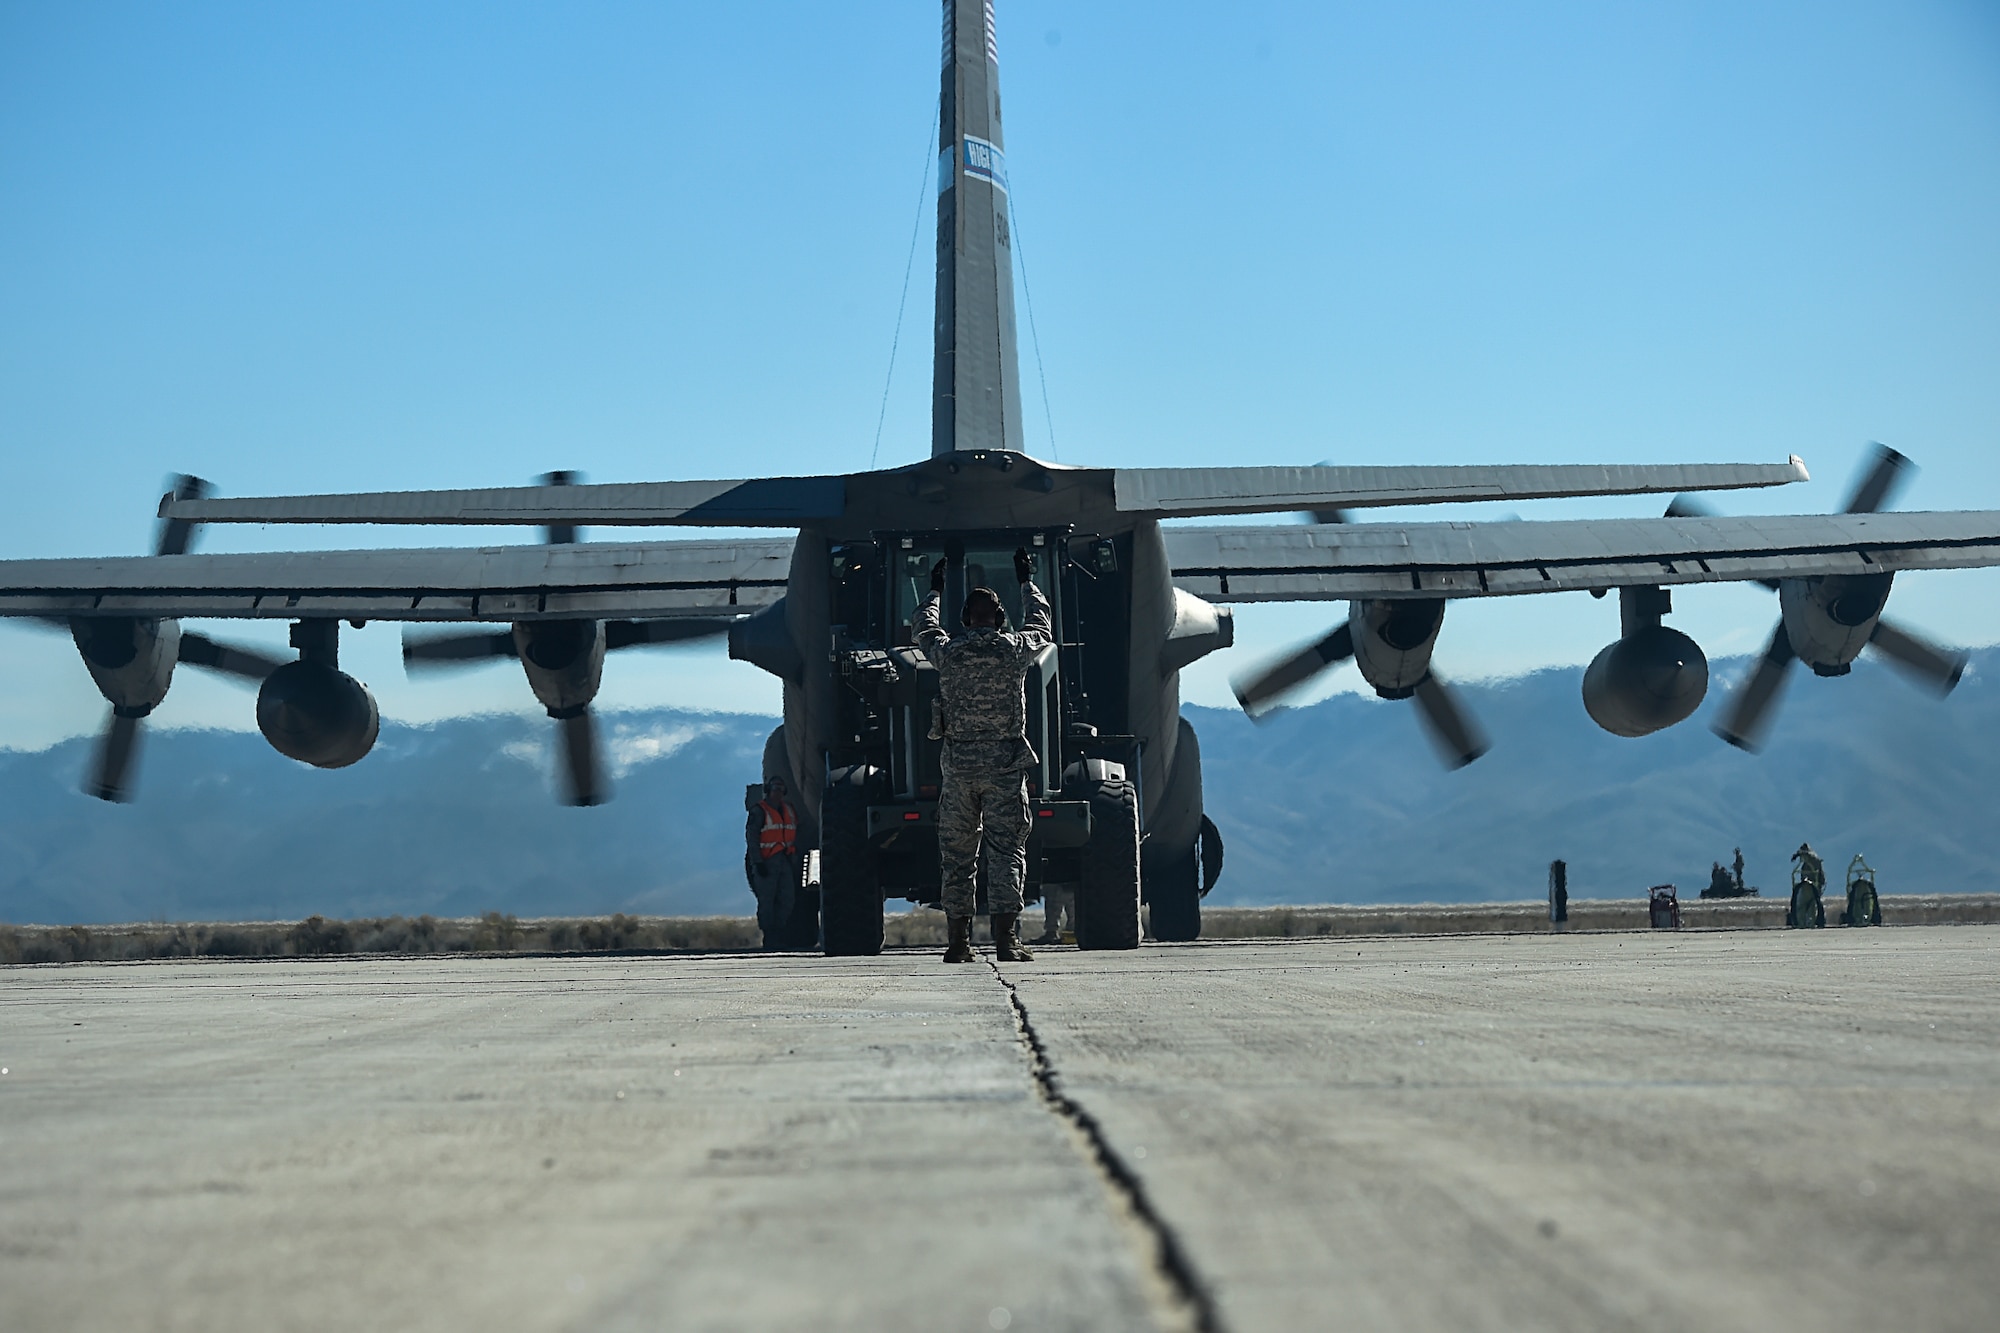 Senior Airman Tyler Connell, 821st Contingency Response Squadron Aerial Port Flight, guides a 10K all-terrain vehicle away from a C-130 Hercules, after performing an engine running offload during Exercise Turbo Distribution 16-02, March 16, 2016, at Amedee Army Airfield, Calif.  During an engine running offload aerial porters offload the cargo while the engines are still on so the aircraft can quickly takeoff.  (U.S. Air Force photo by Staff Sgt. Robert Hicks/Released)